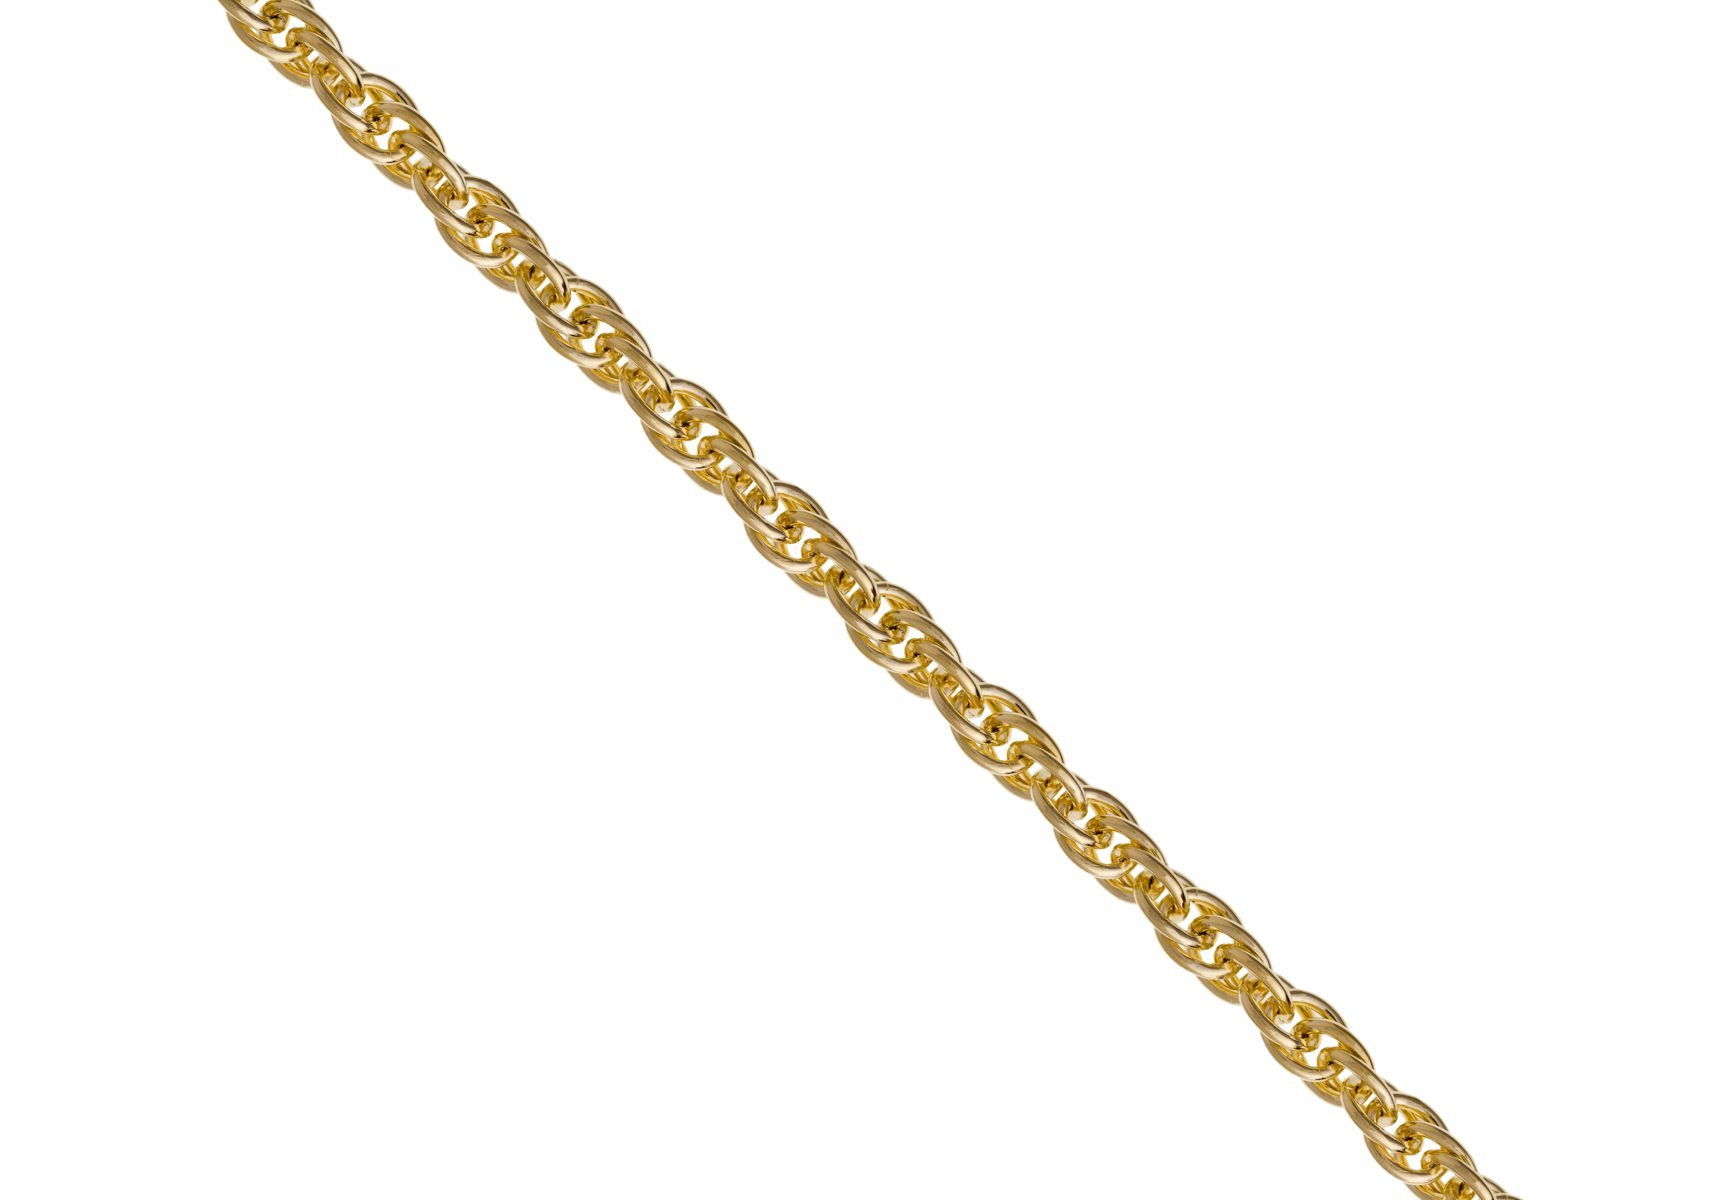 Double cable gold chain machine